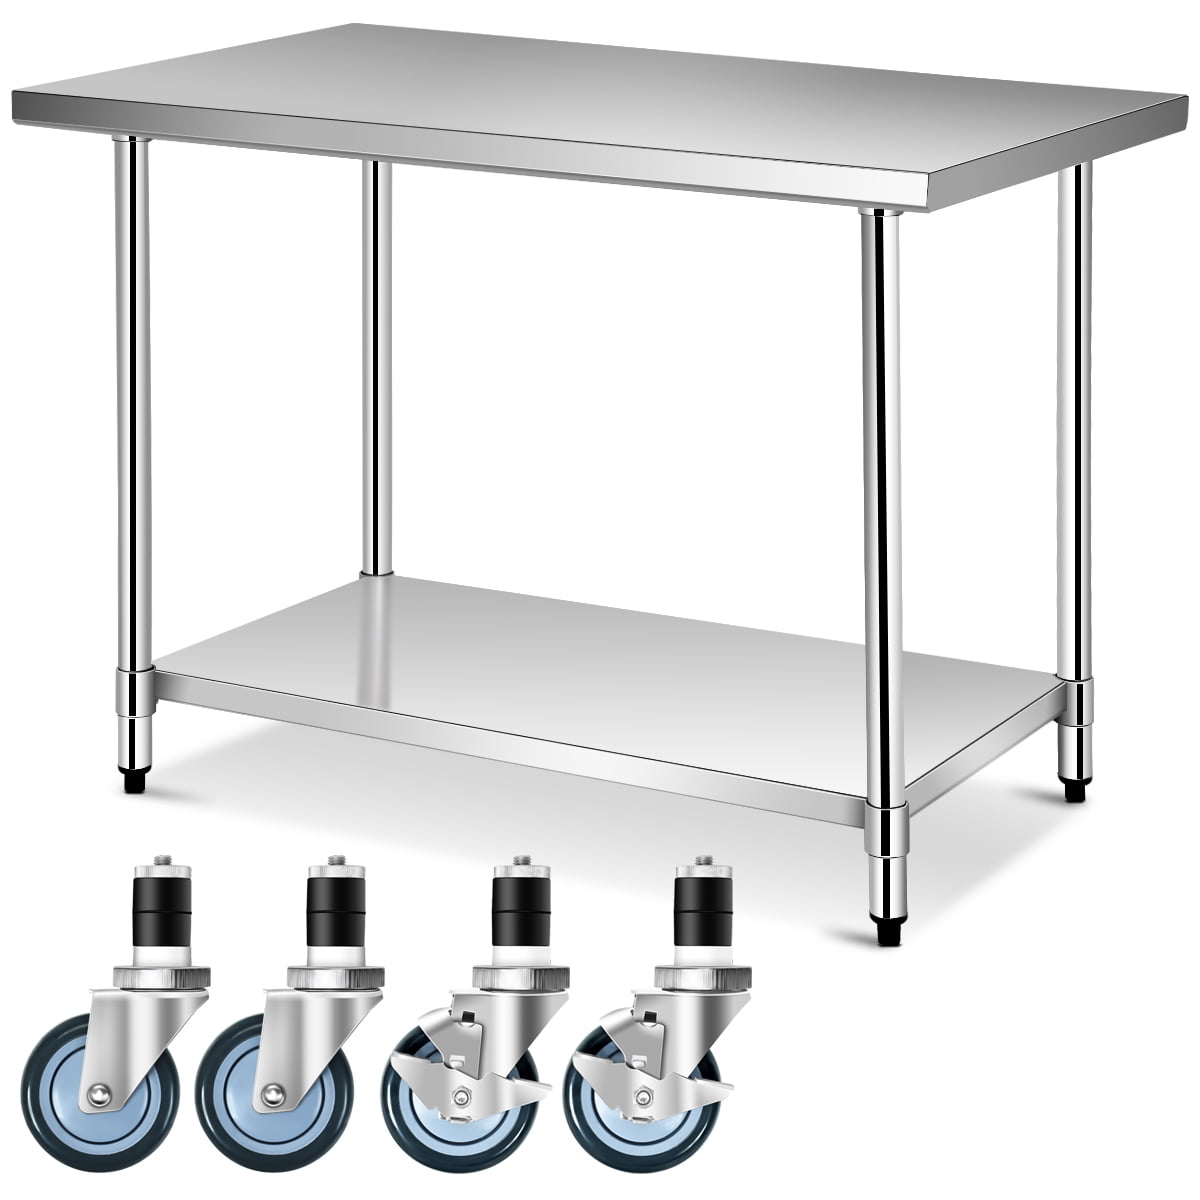 with Adjustable Shelf and casters ACUMSTE 60x30 inches Stainless-Steel Commercial Kitchen Work Table 